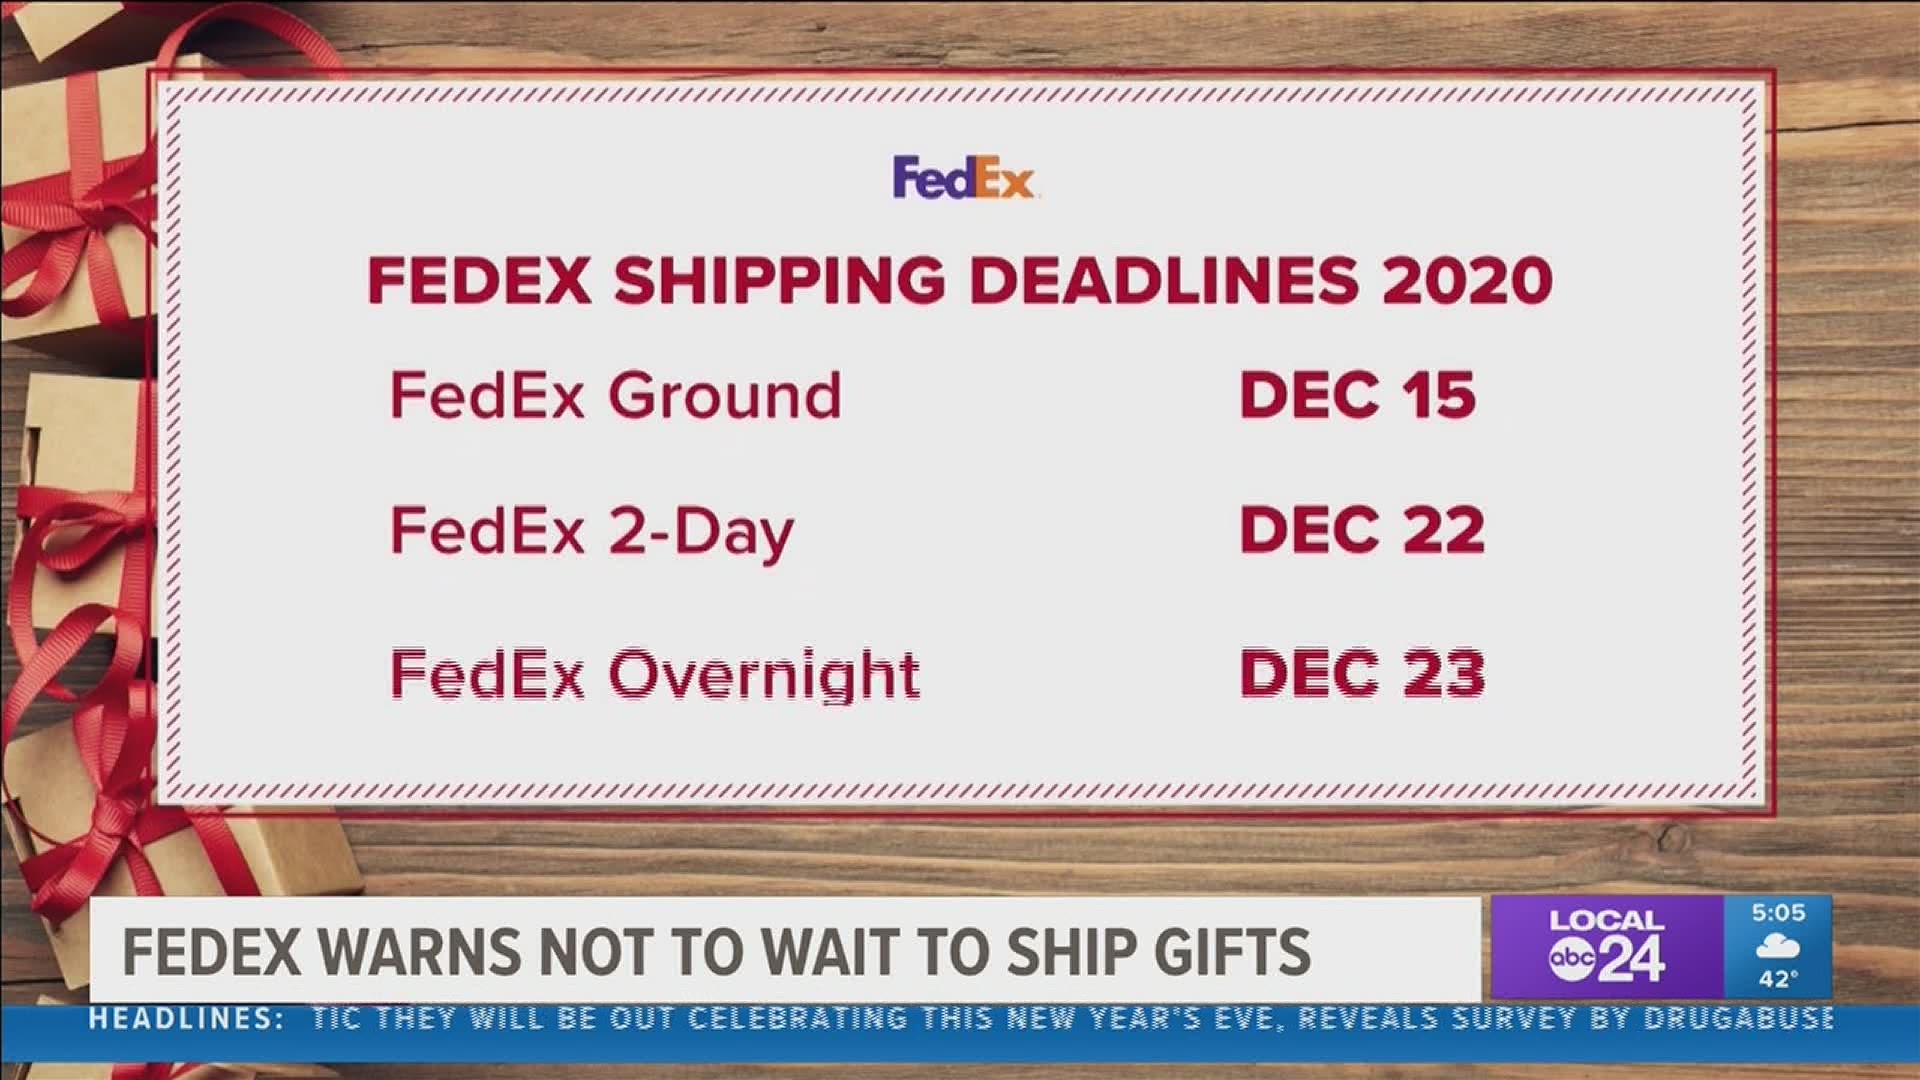 "I wouldn't even wait. If you're a procrastinator, I would say procrastinate until today," said Chris Bishop, FedEx Station Operations Manager.